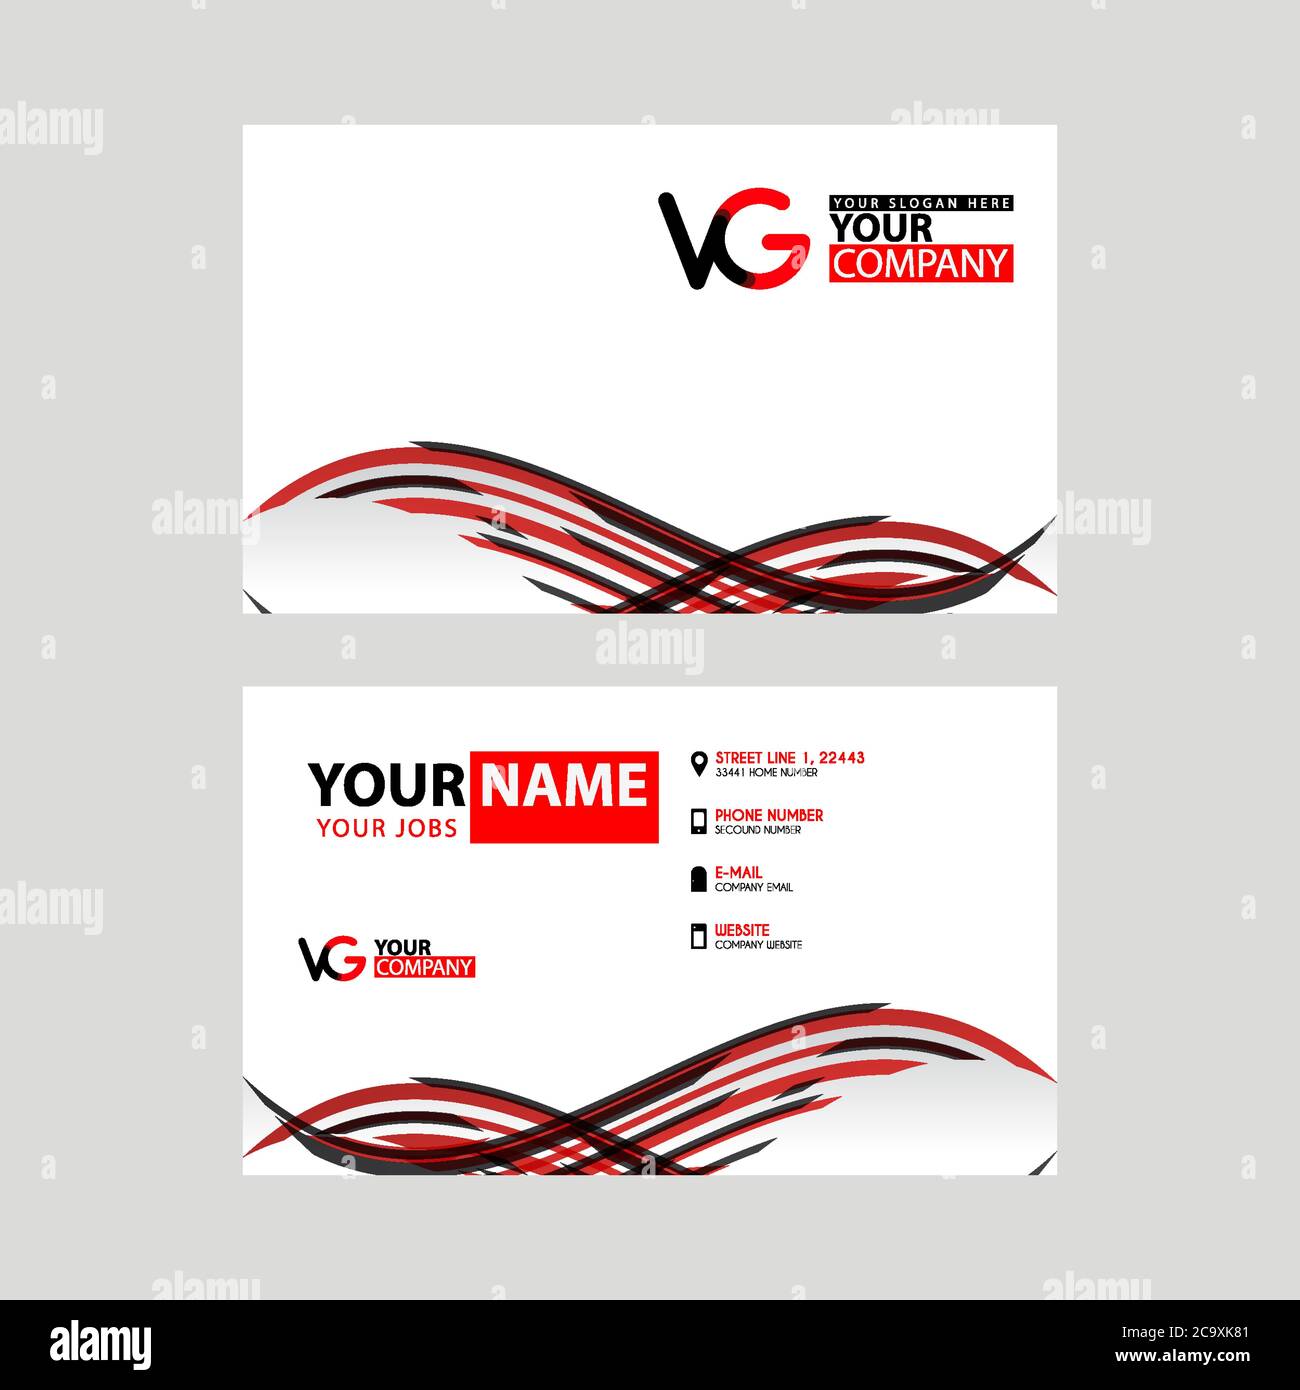 Horizontal name card with VL logo Letter and simple red black and  triangular decoration on the edge.